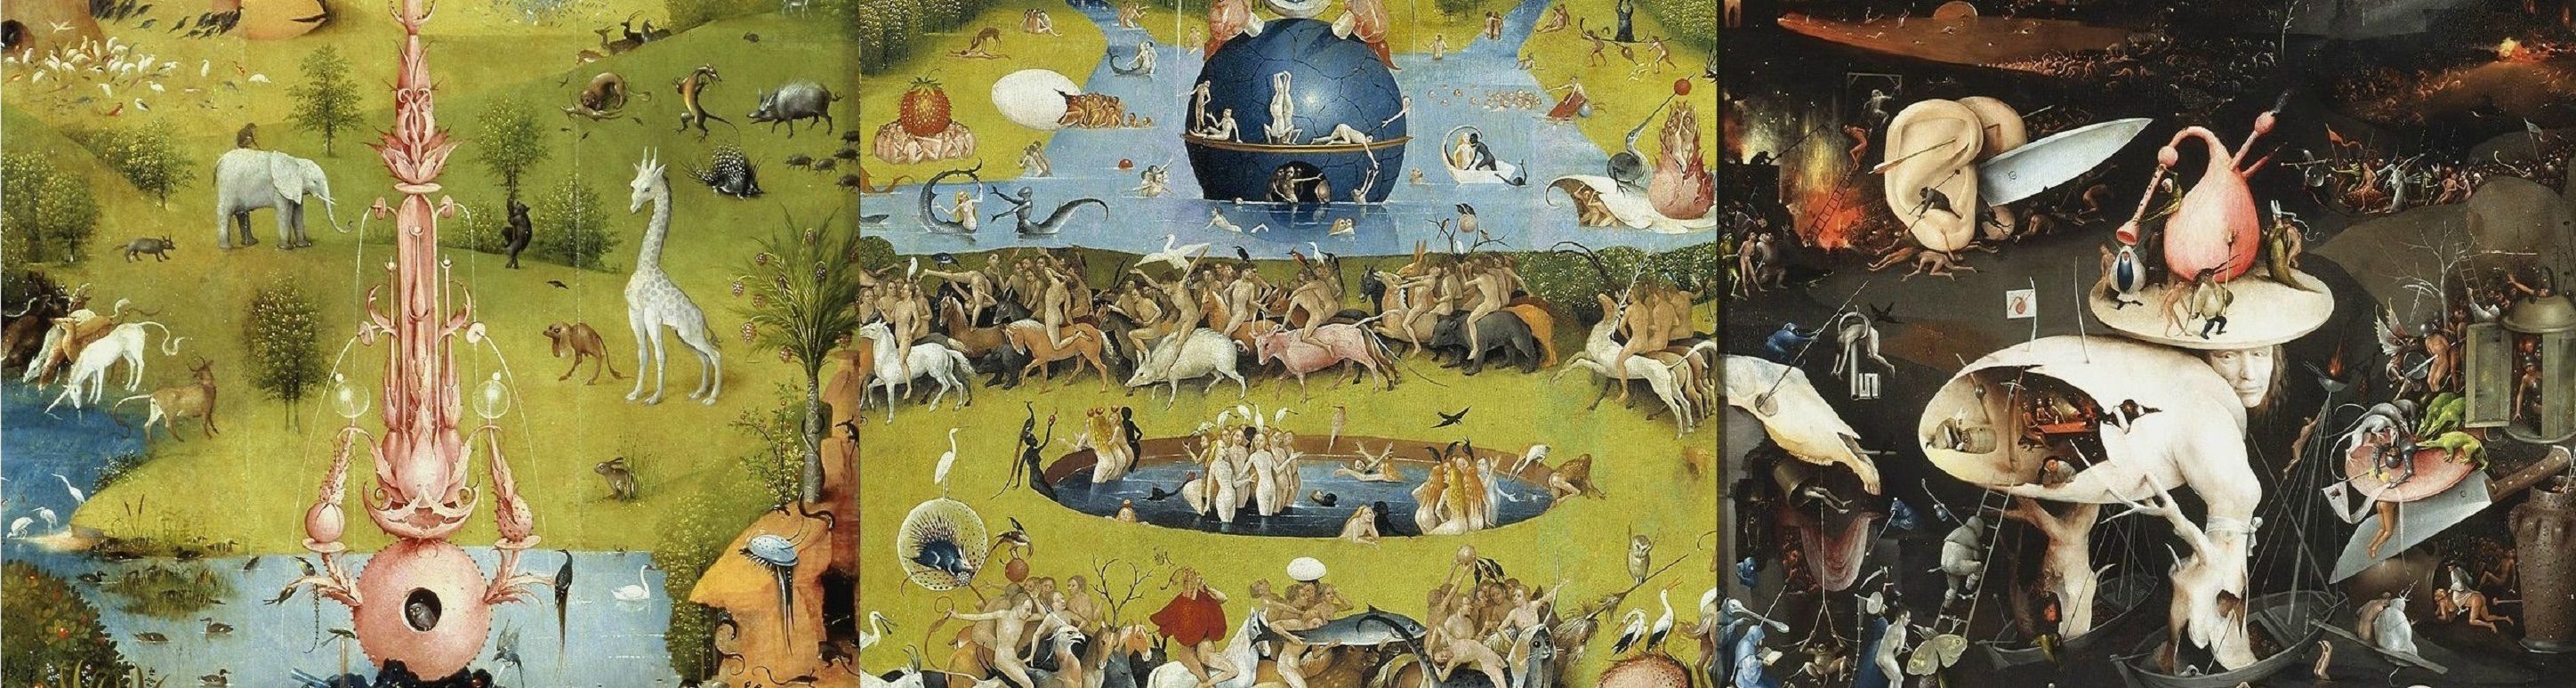 Hieronymus Bosch, The Garden Of Earthly Delights [773x2896] (For Three Monitor Desktops)